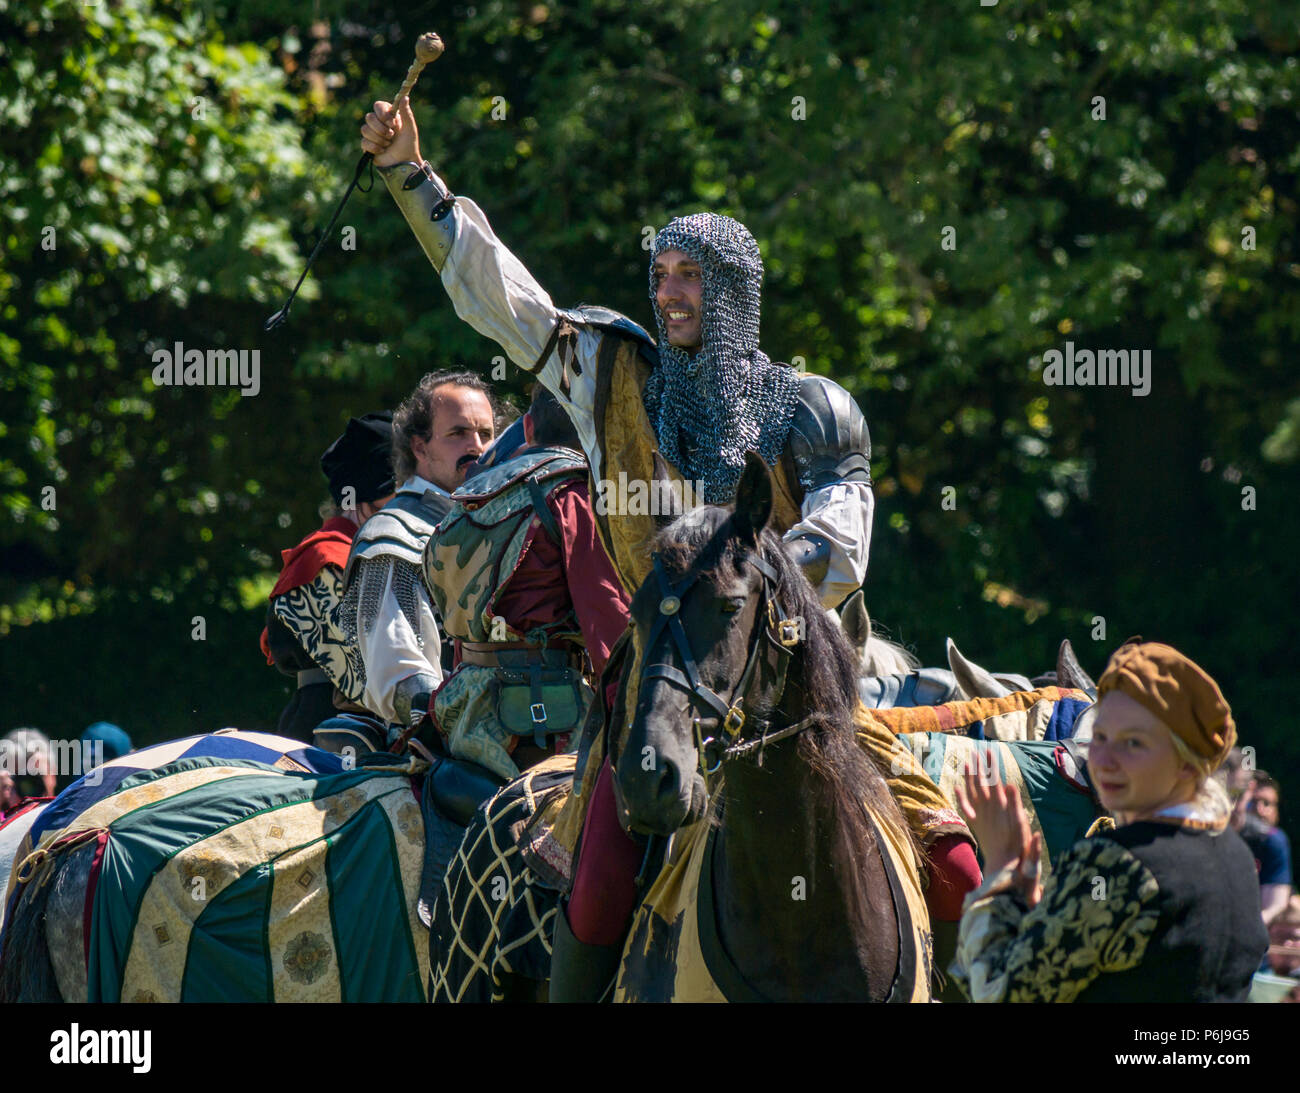 Jousting and Medieval Fair at Linlithgow Palace, Linlithgow, Scotland, United Kingdom, 30th June 2018. Historic Environment Scotland kick off their summer entertainment programme with a fabulous display of Medieval jousting in the grounds of the historic castle. The jousting is performed by Les Amis D'Onno equine stunt team. A knight holds up the lucky favour he won Stock Photo